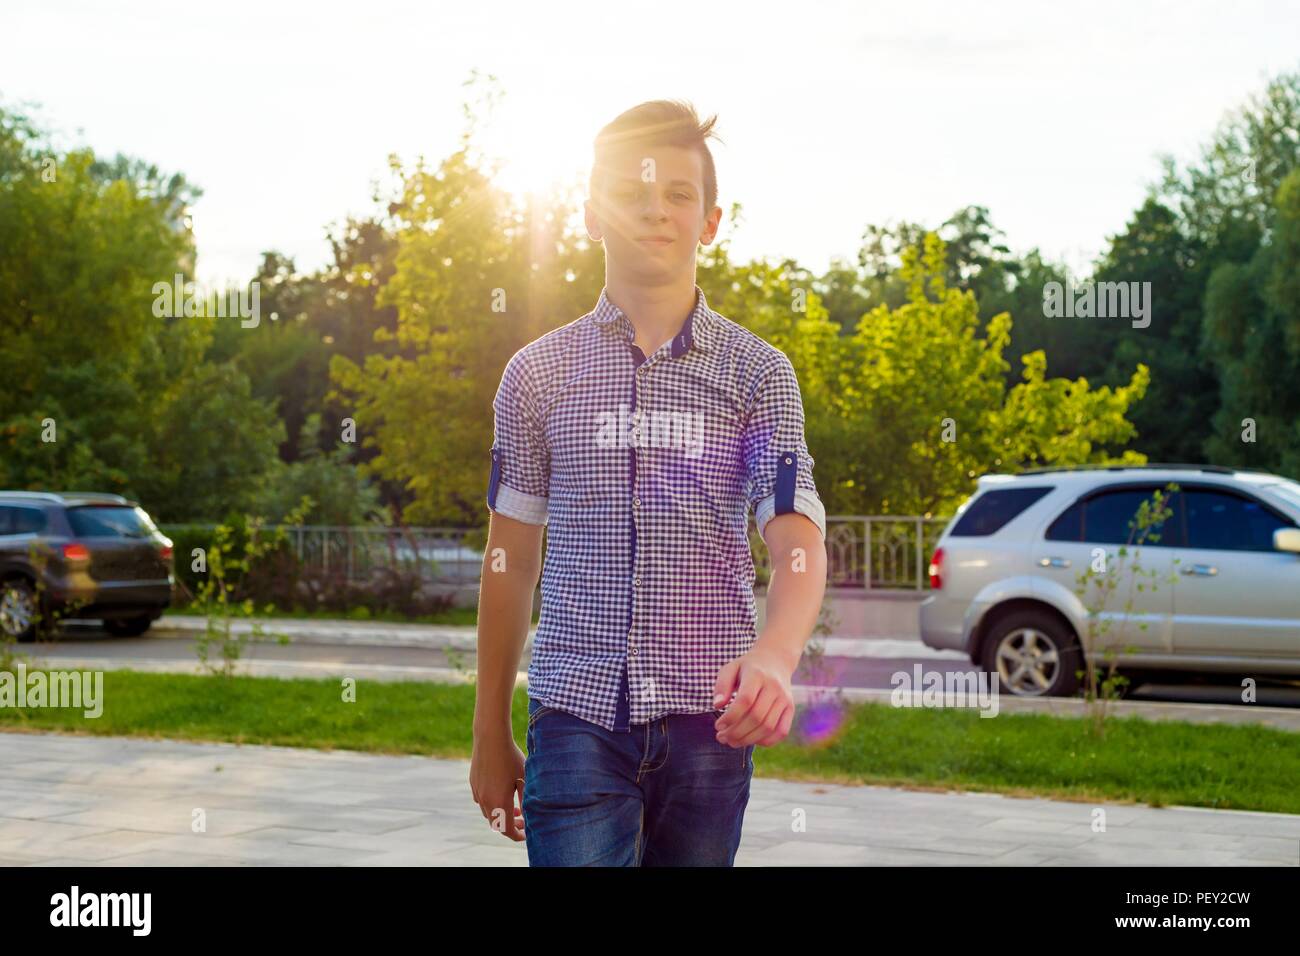 Outdoor portrait of a teenage boy 14, 15 years old. Urban background Stock Photo